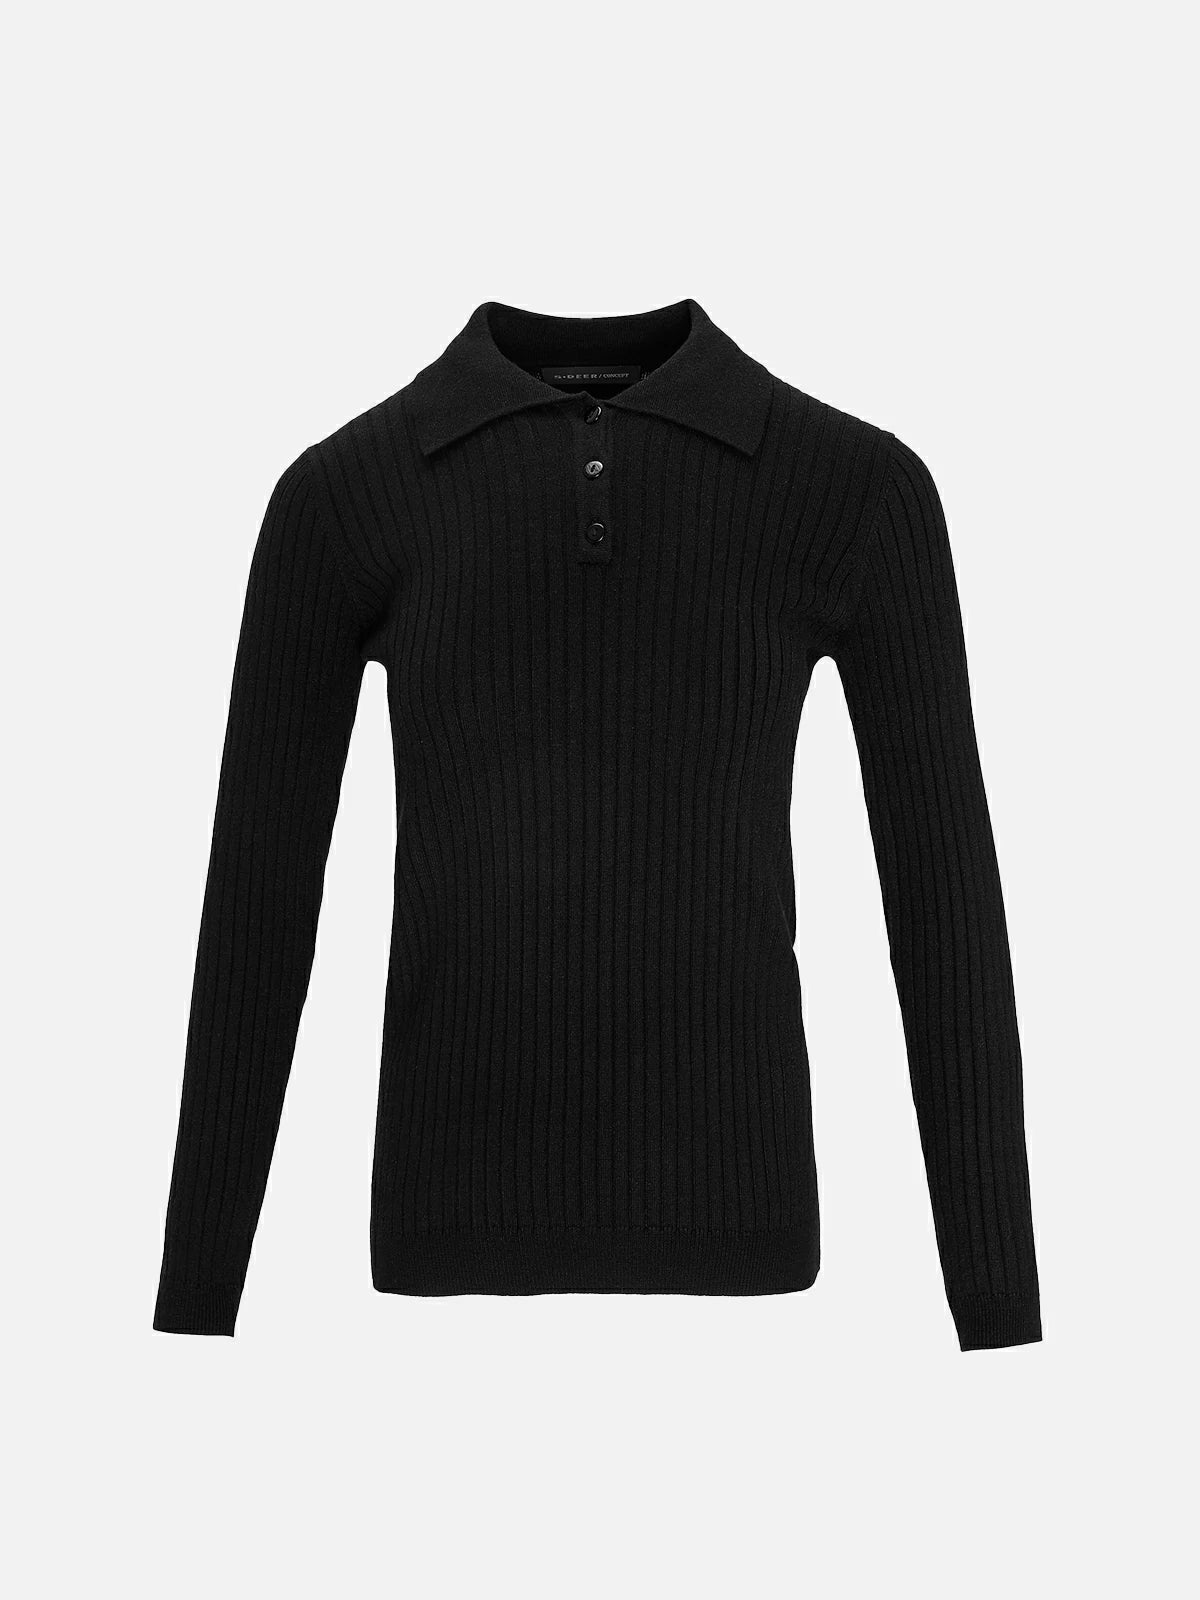 Redefine your knitwear essentials with this black sweater, highlighting a classic polo collar, buttoned front, and slim fit.